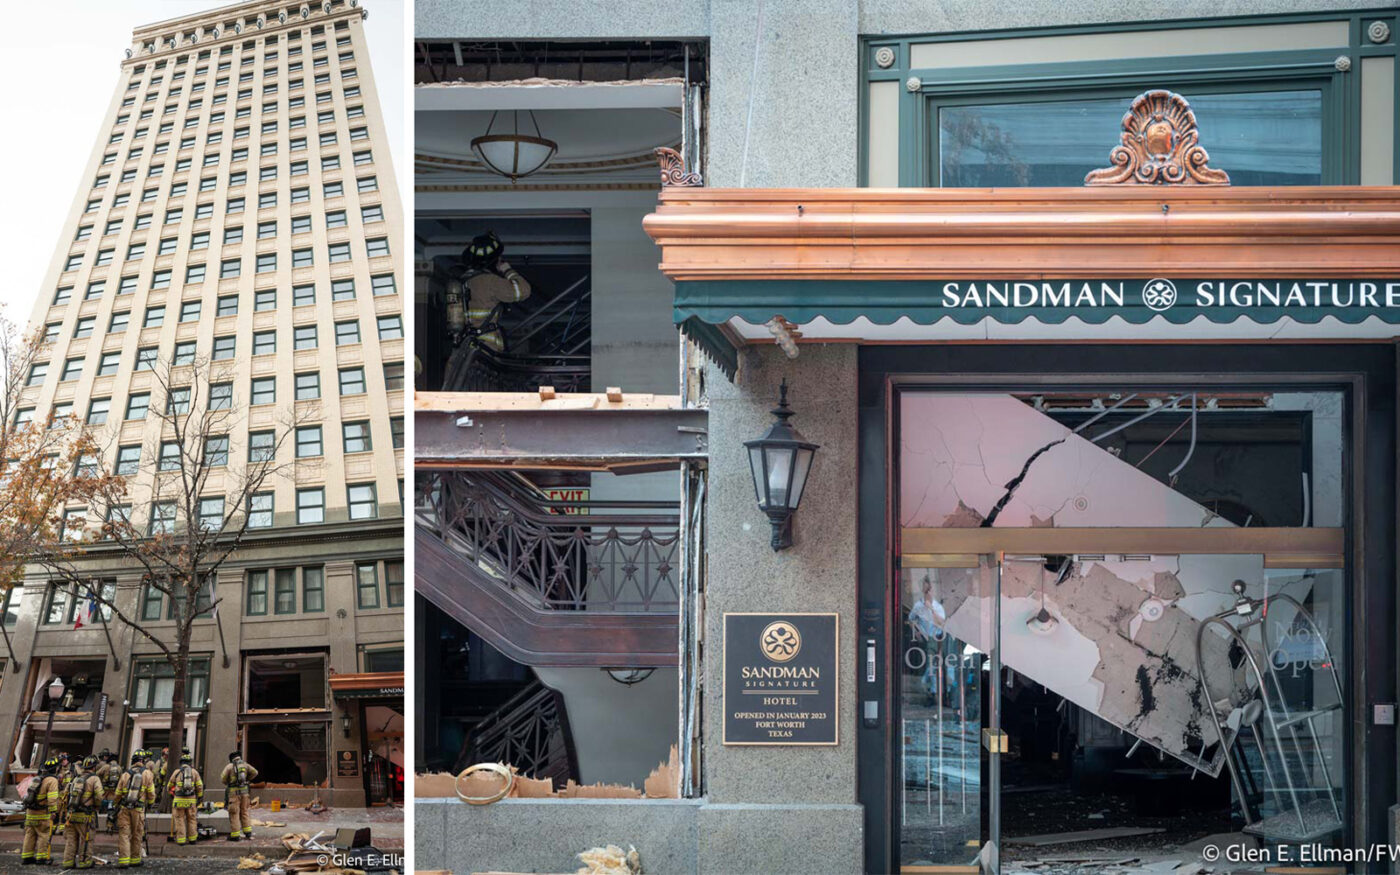 Sandman Signature Hotel Explosion Injures 21 in Downtown Fort Worth